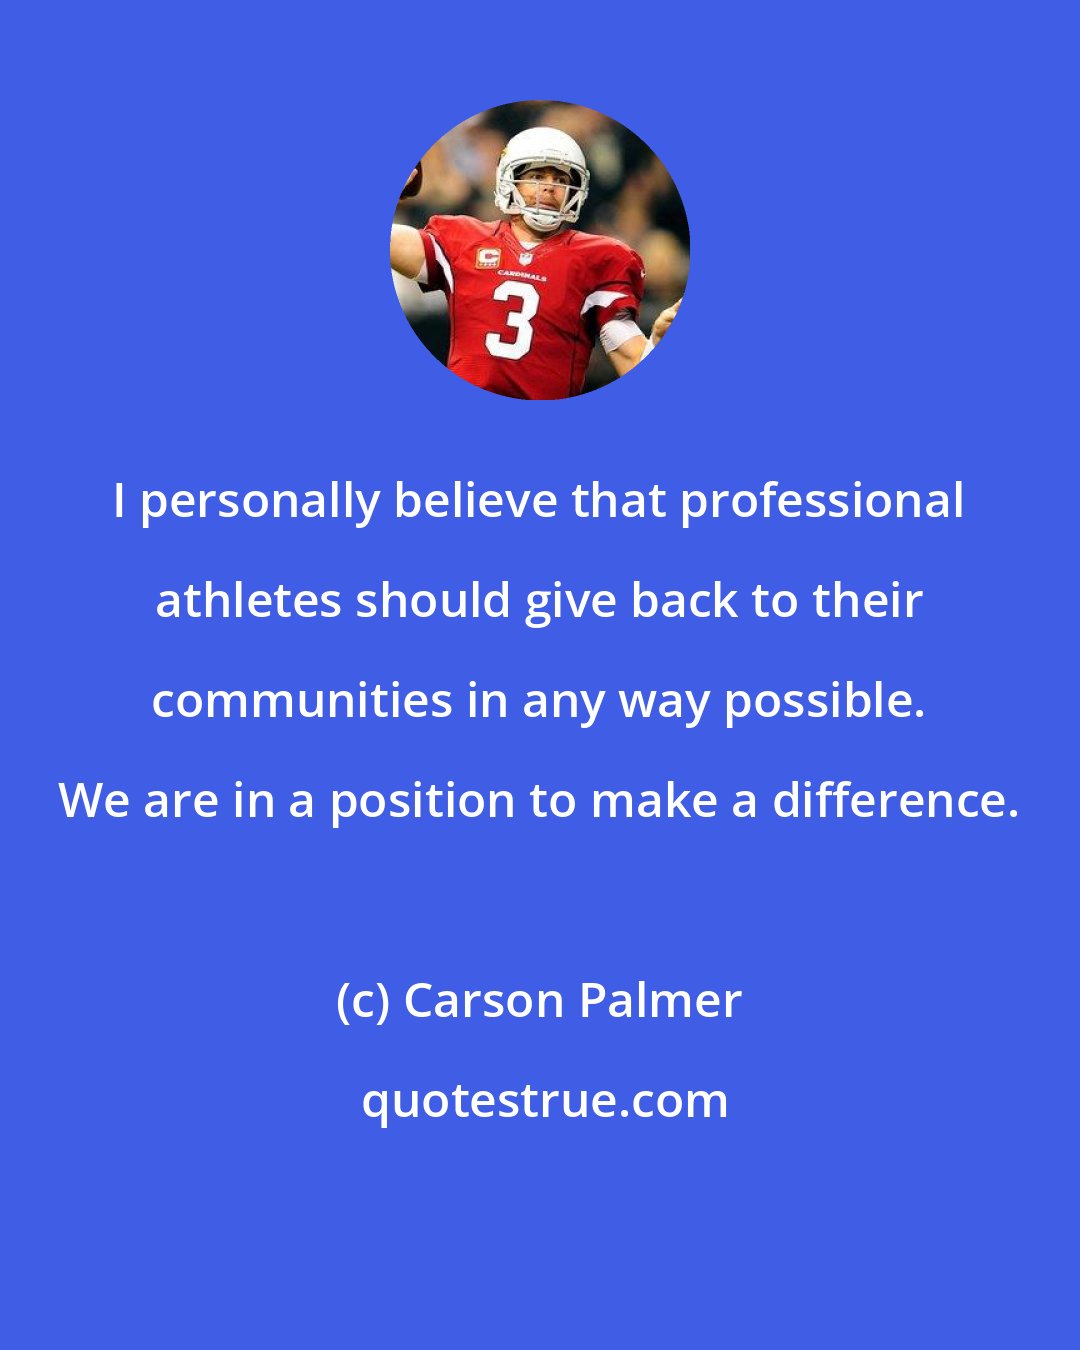 Carson Palmer: I personally believe that professional athletes should give back to their communities in any way possible. We are in a position to make a difference.